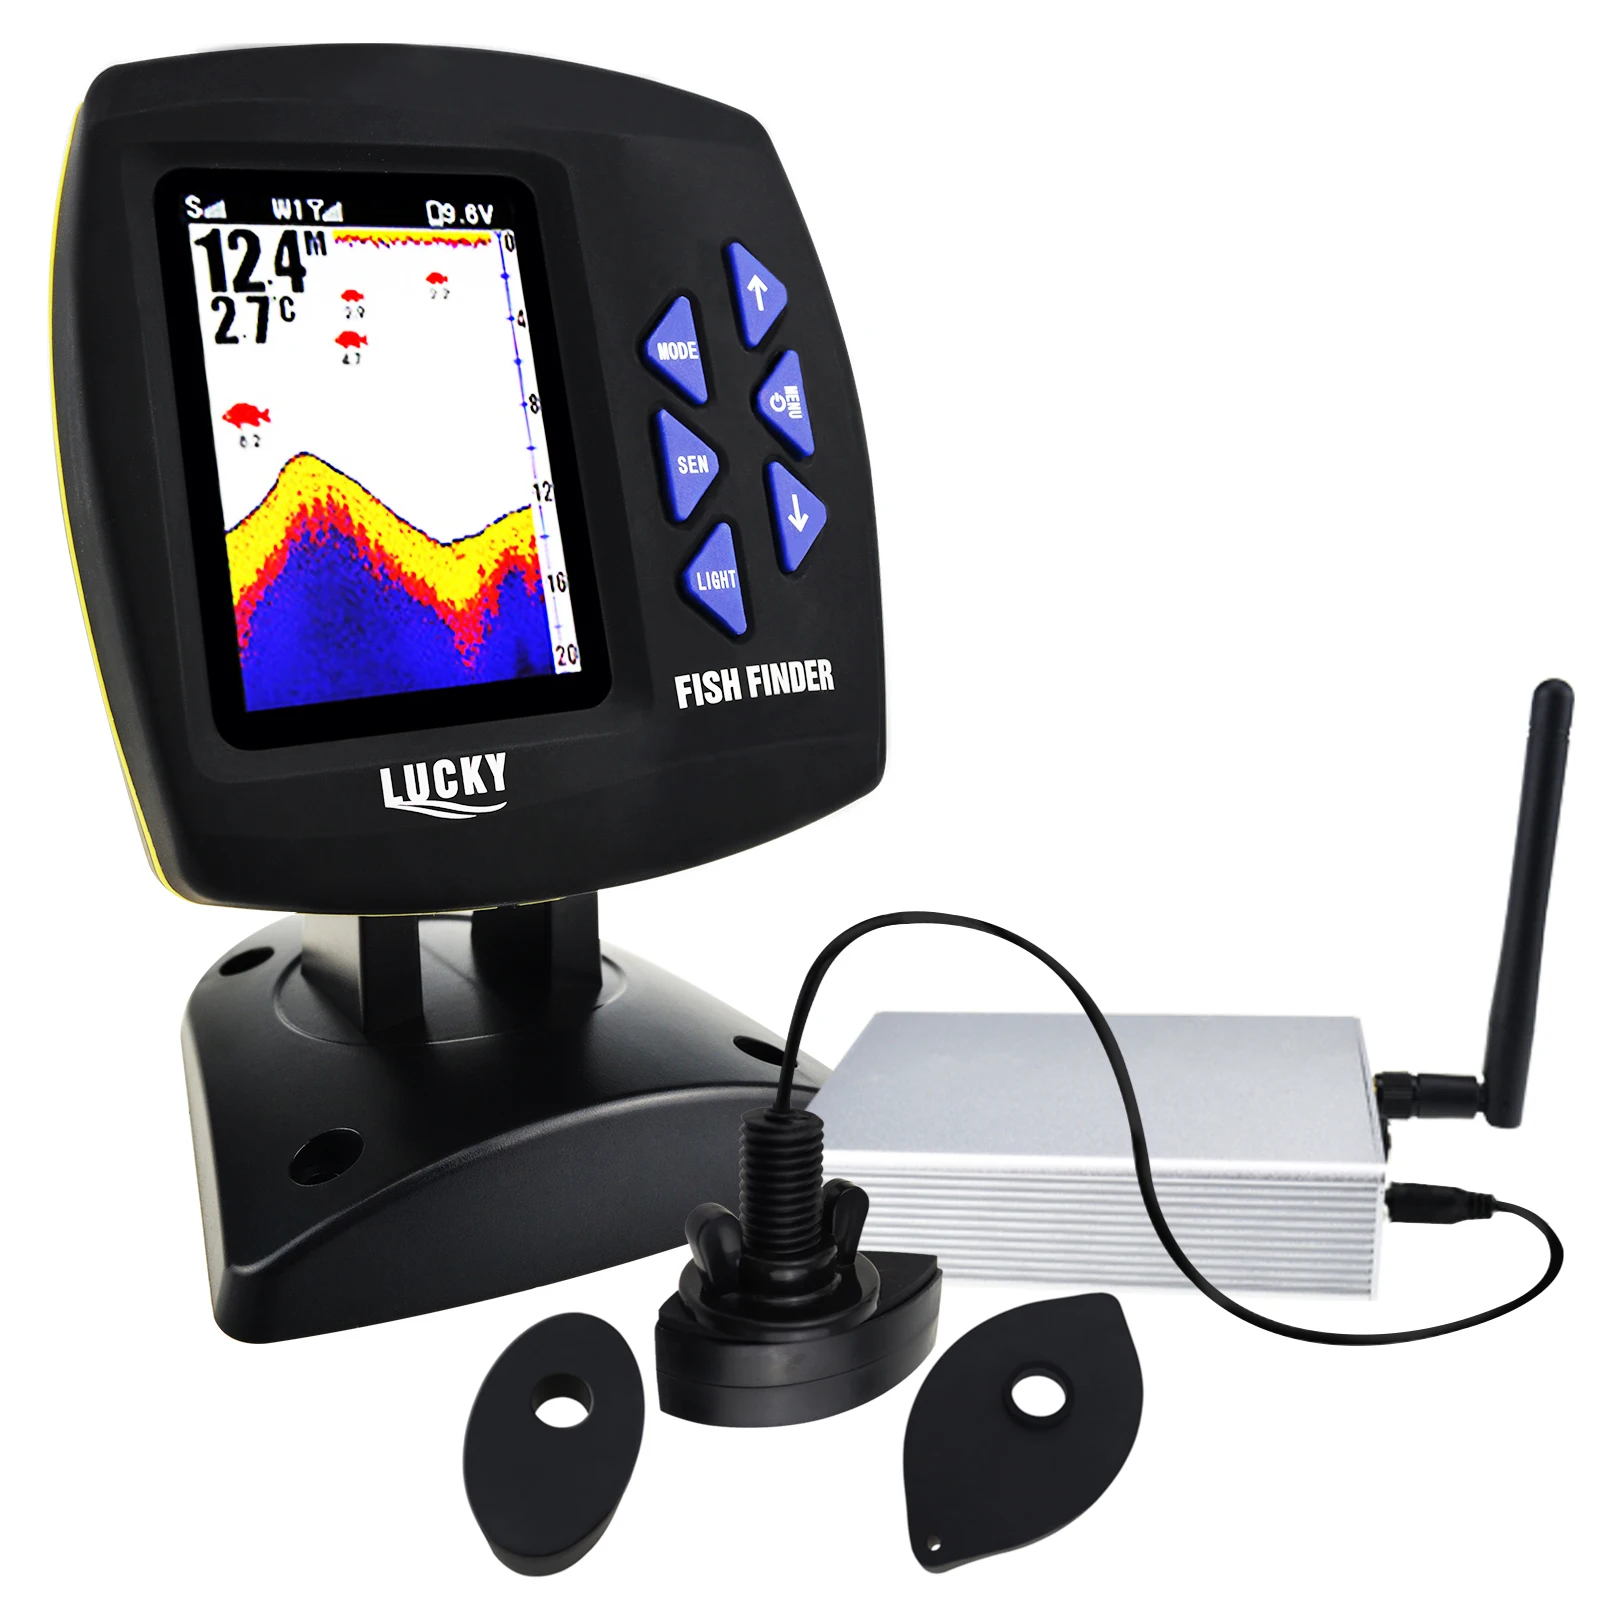 LUCKY Fishfinder 300m/ 980ft Fishing Wireless